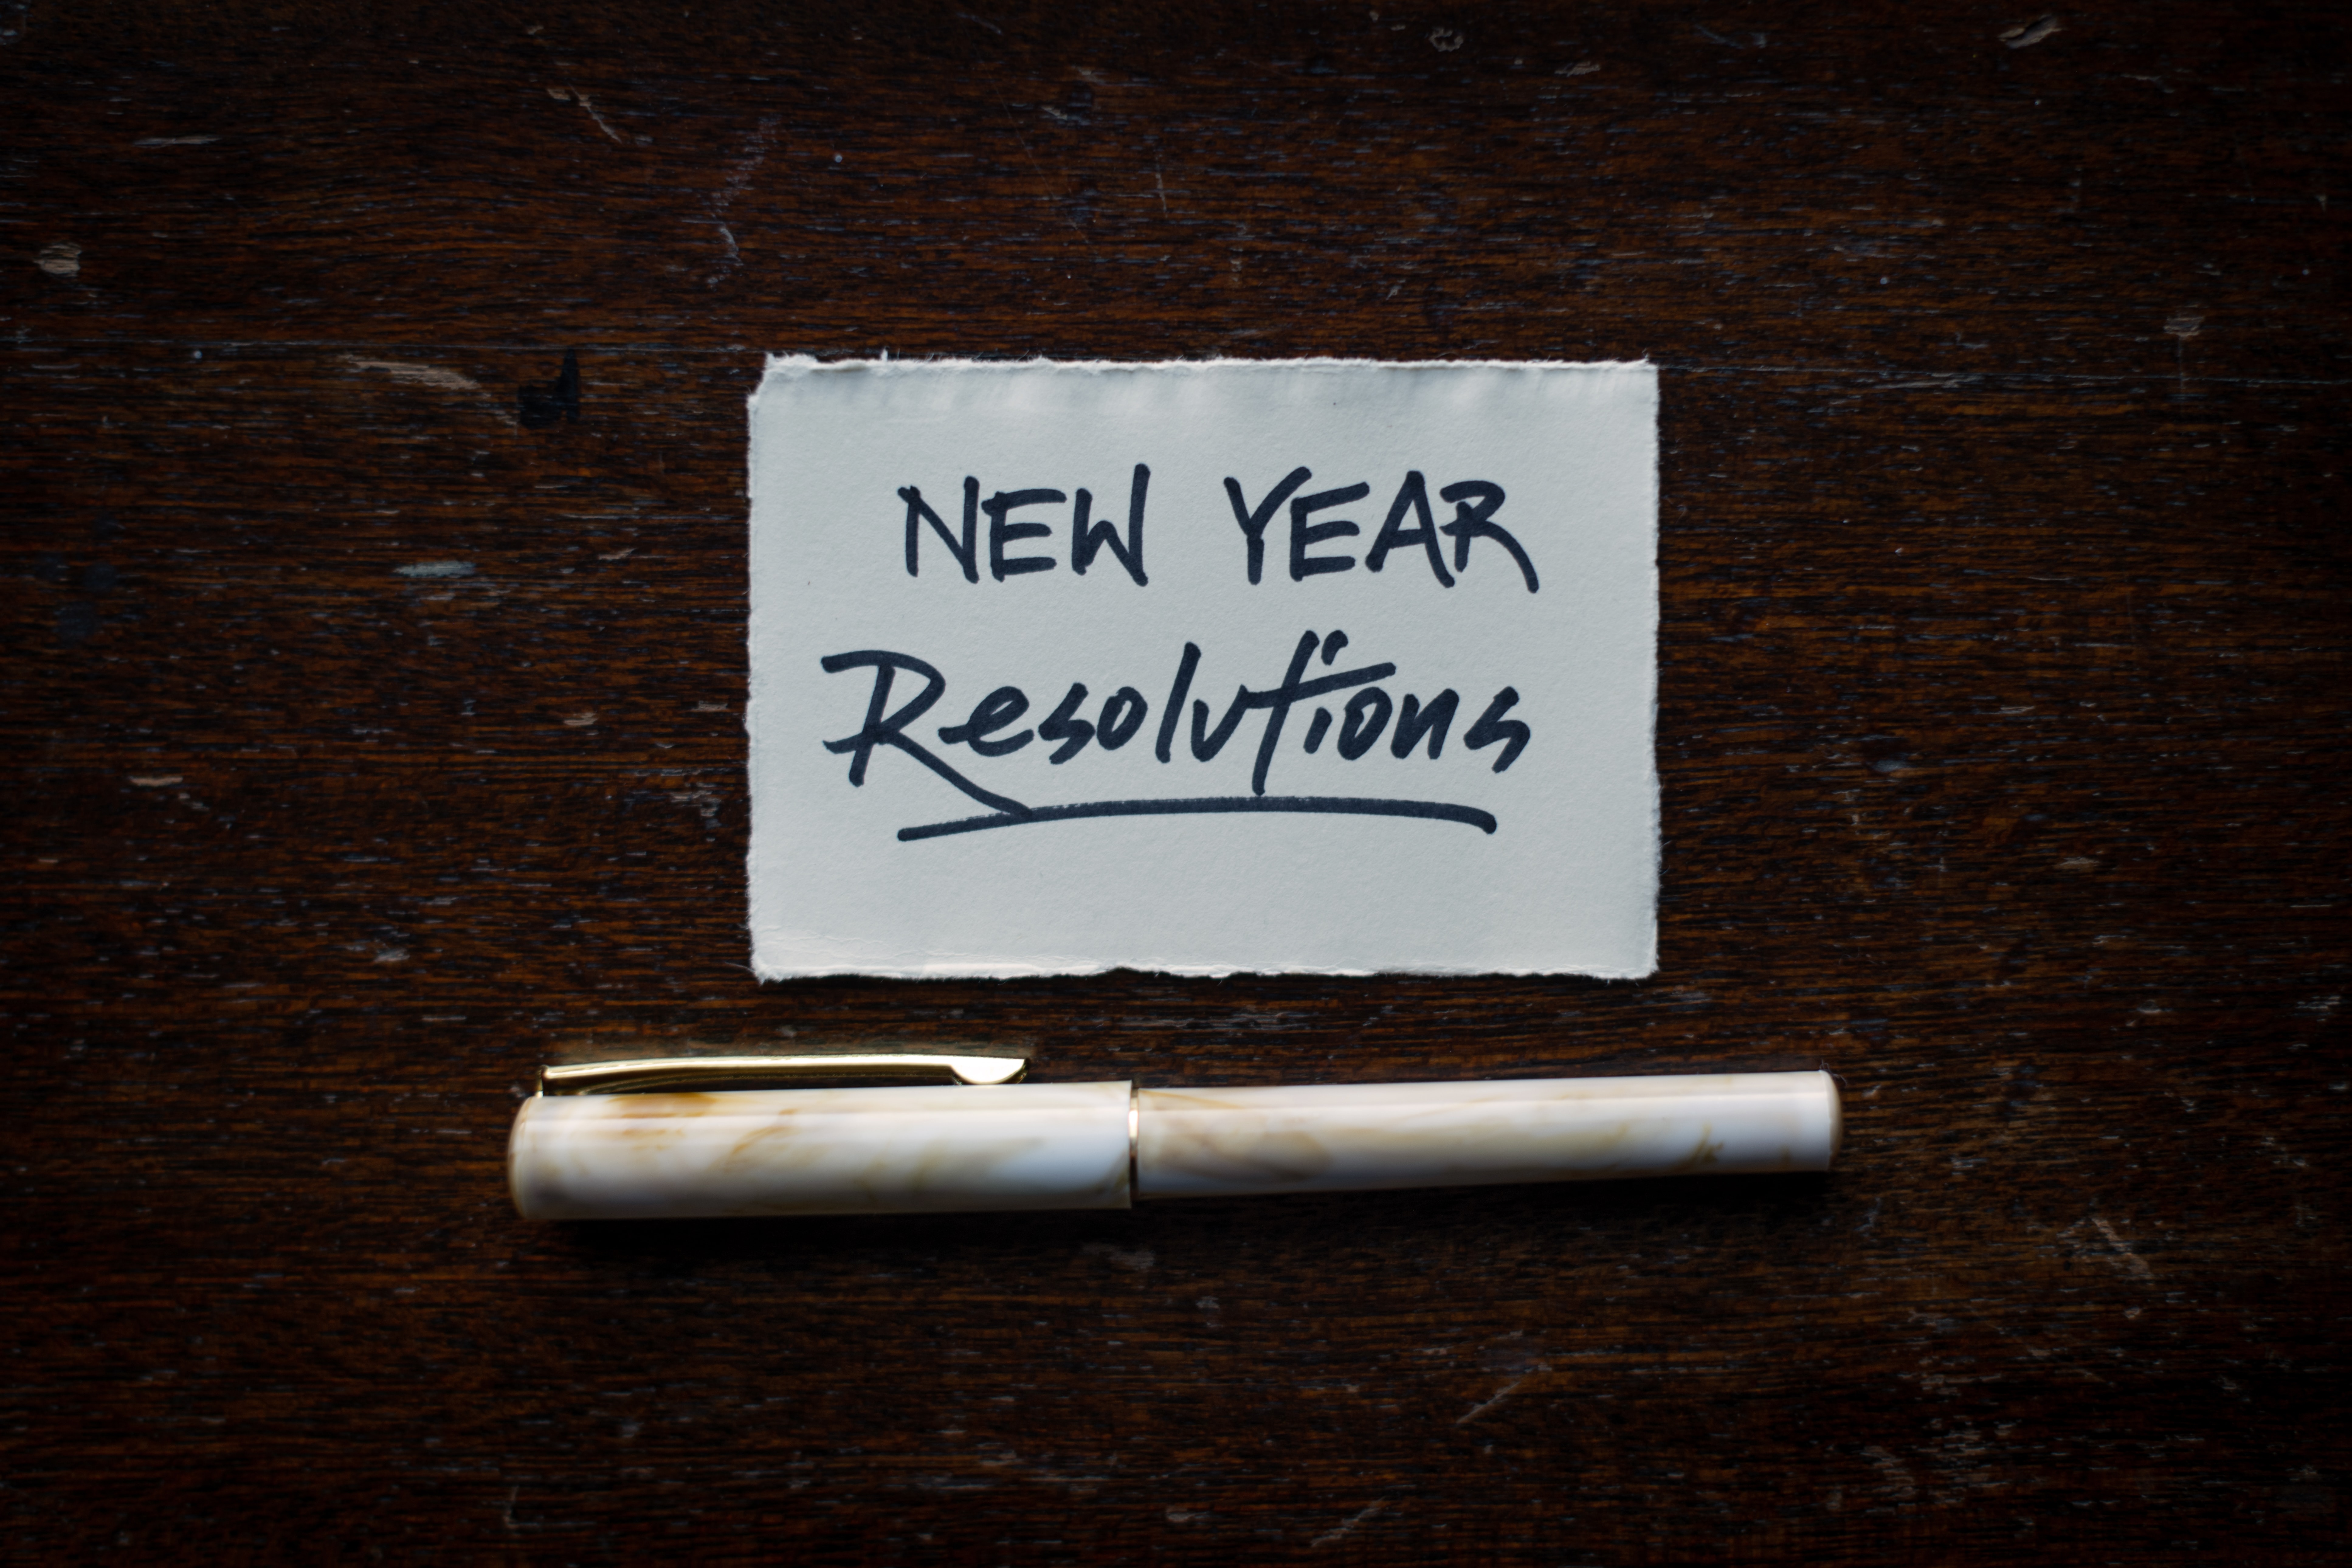 Waste Reduction: How Low Can You Go? -- New Year's Resolutions